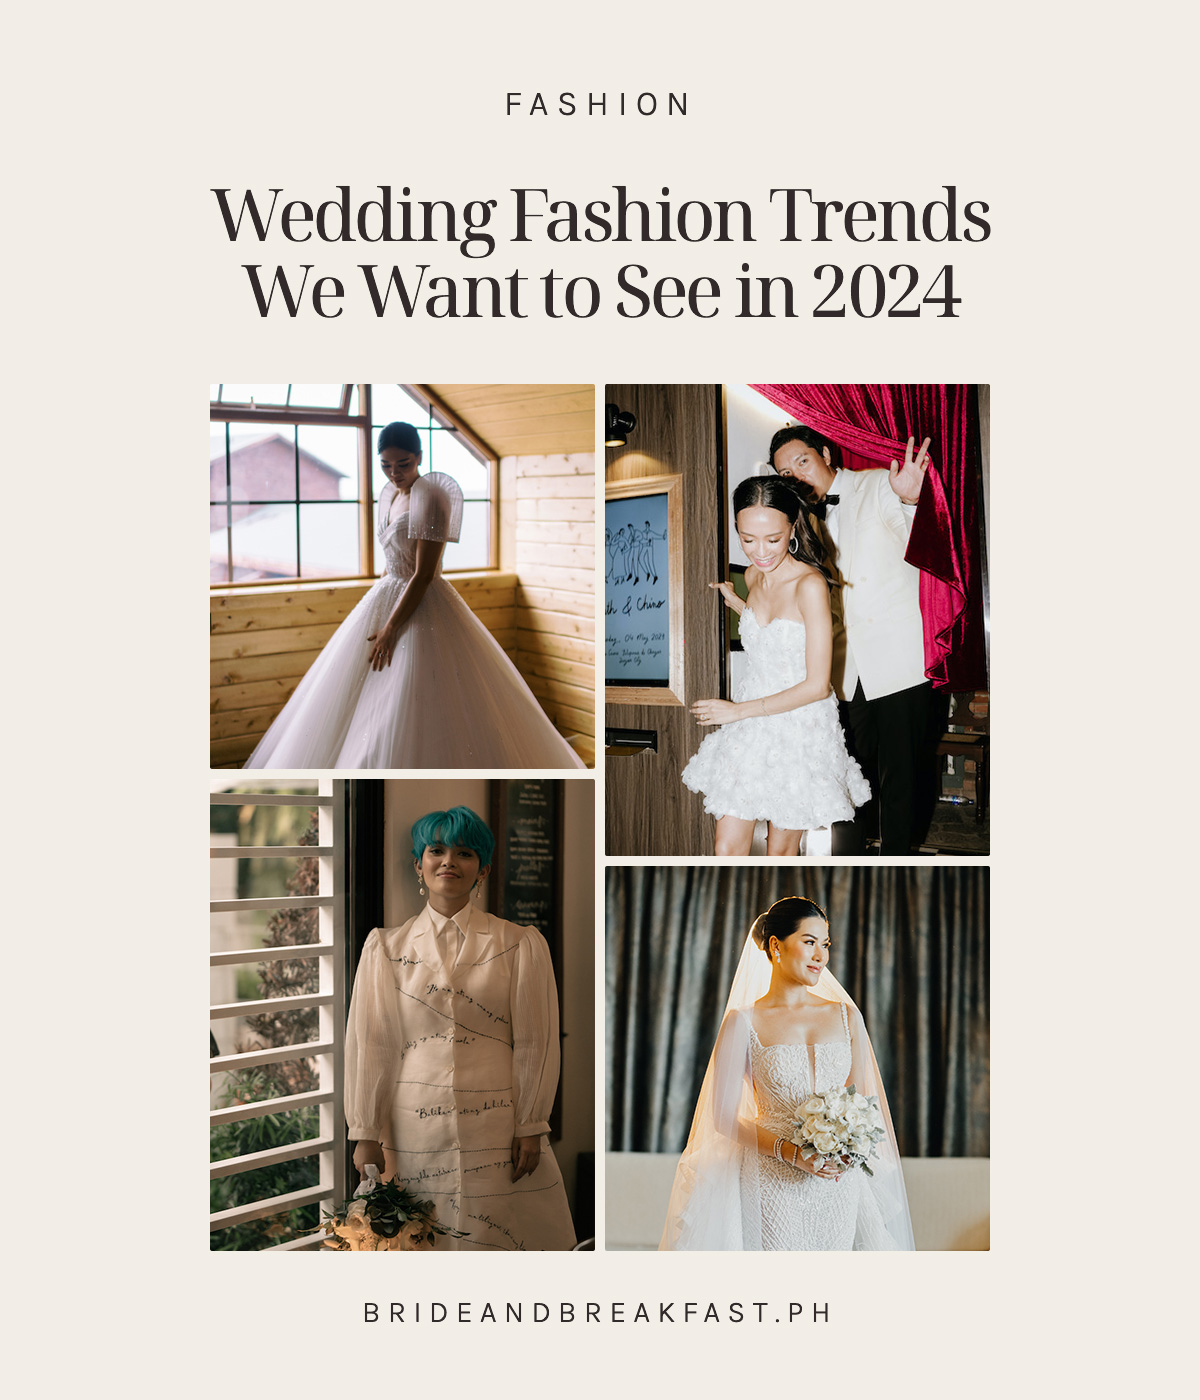 Wedding Fashion Trends We Want to See in 2024